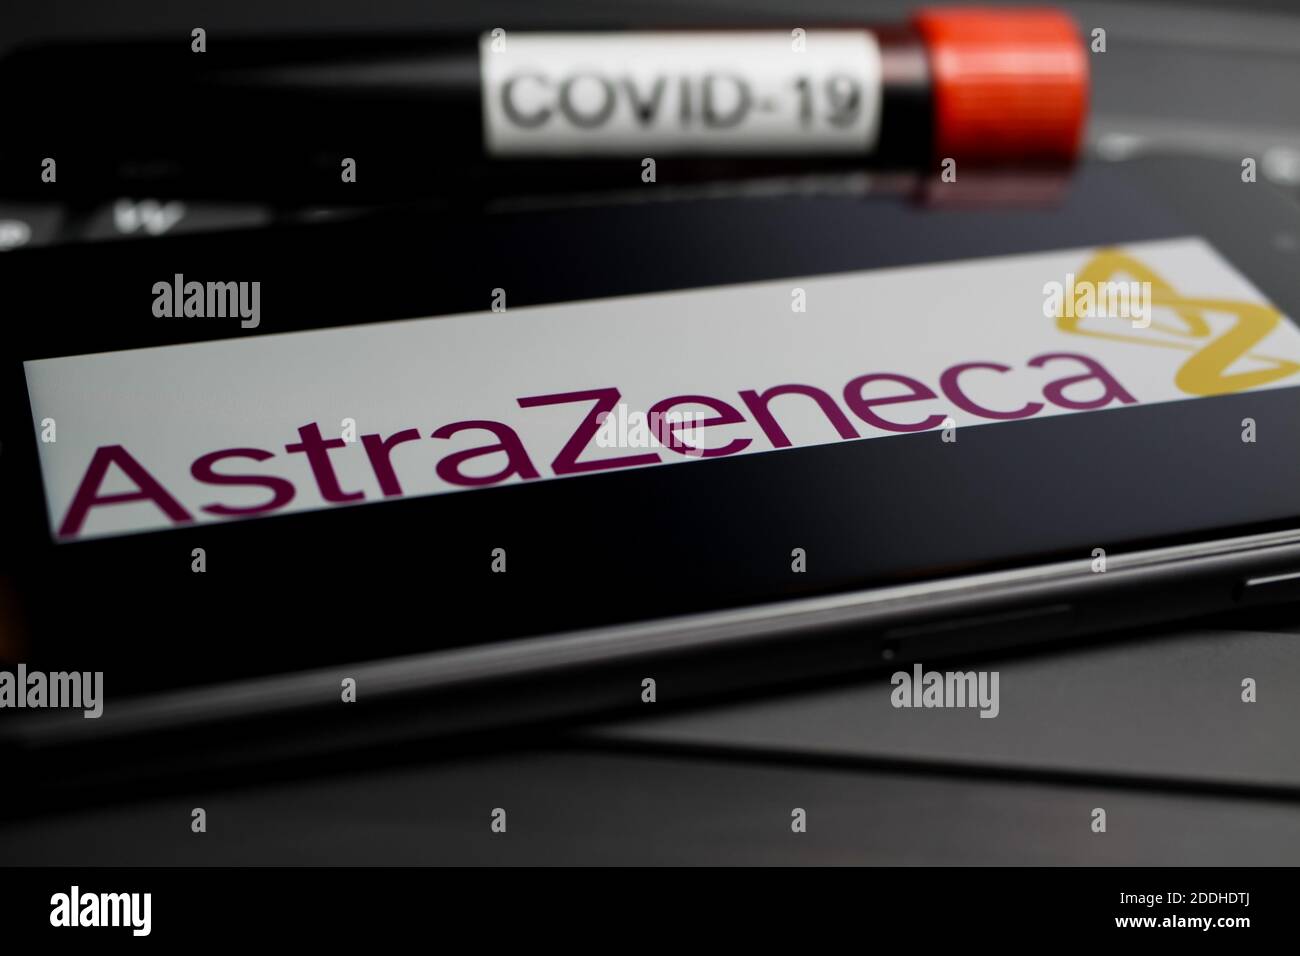 Viersen, Germany - November 9. 2020: Close up of mobile phone screen with logo lettering Astra Zeneca on computer keyboard with covid-19 blood sample Stock Photo